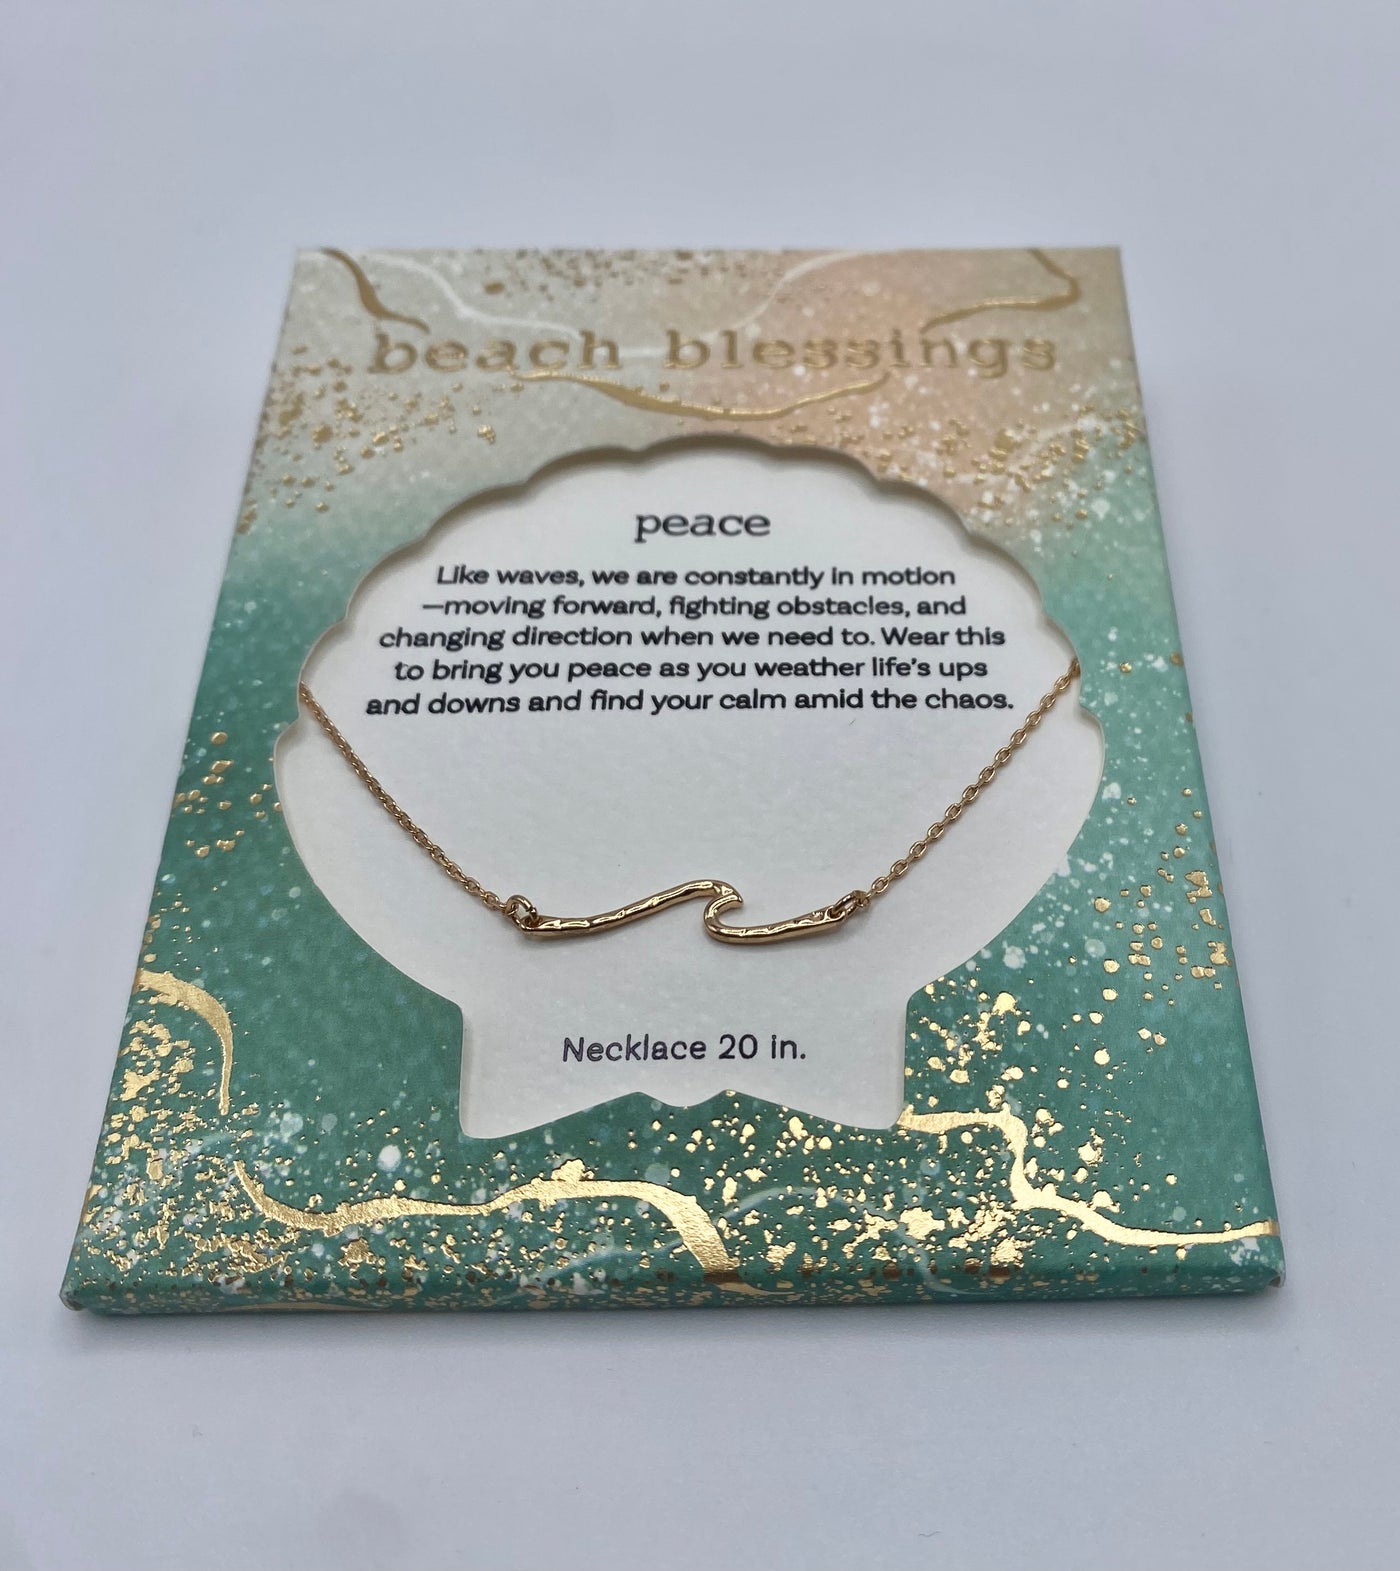 Beach Blessings Necklaces